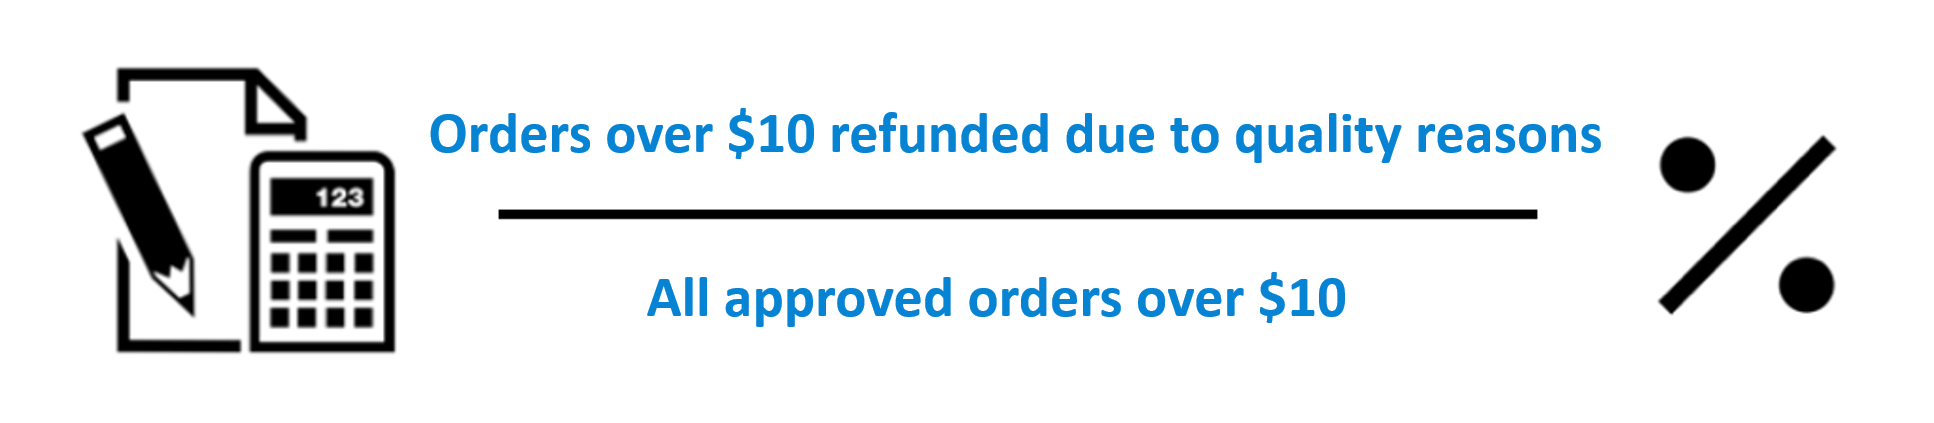 quality_refund_rate_EN.png